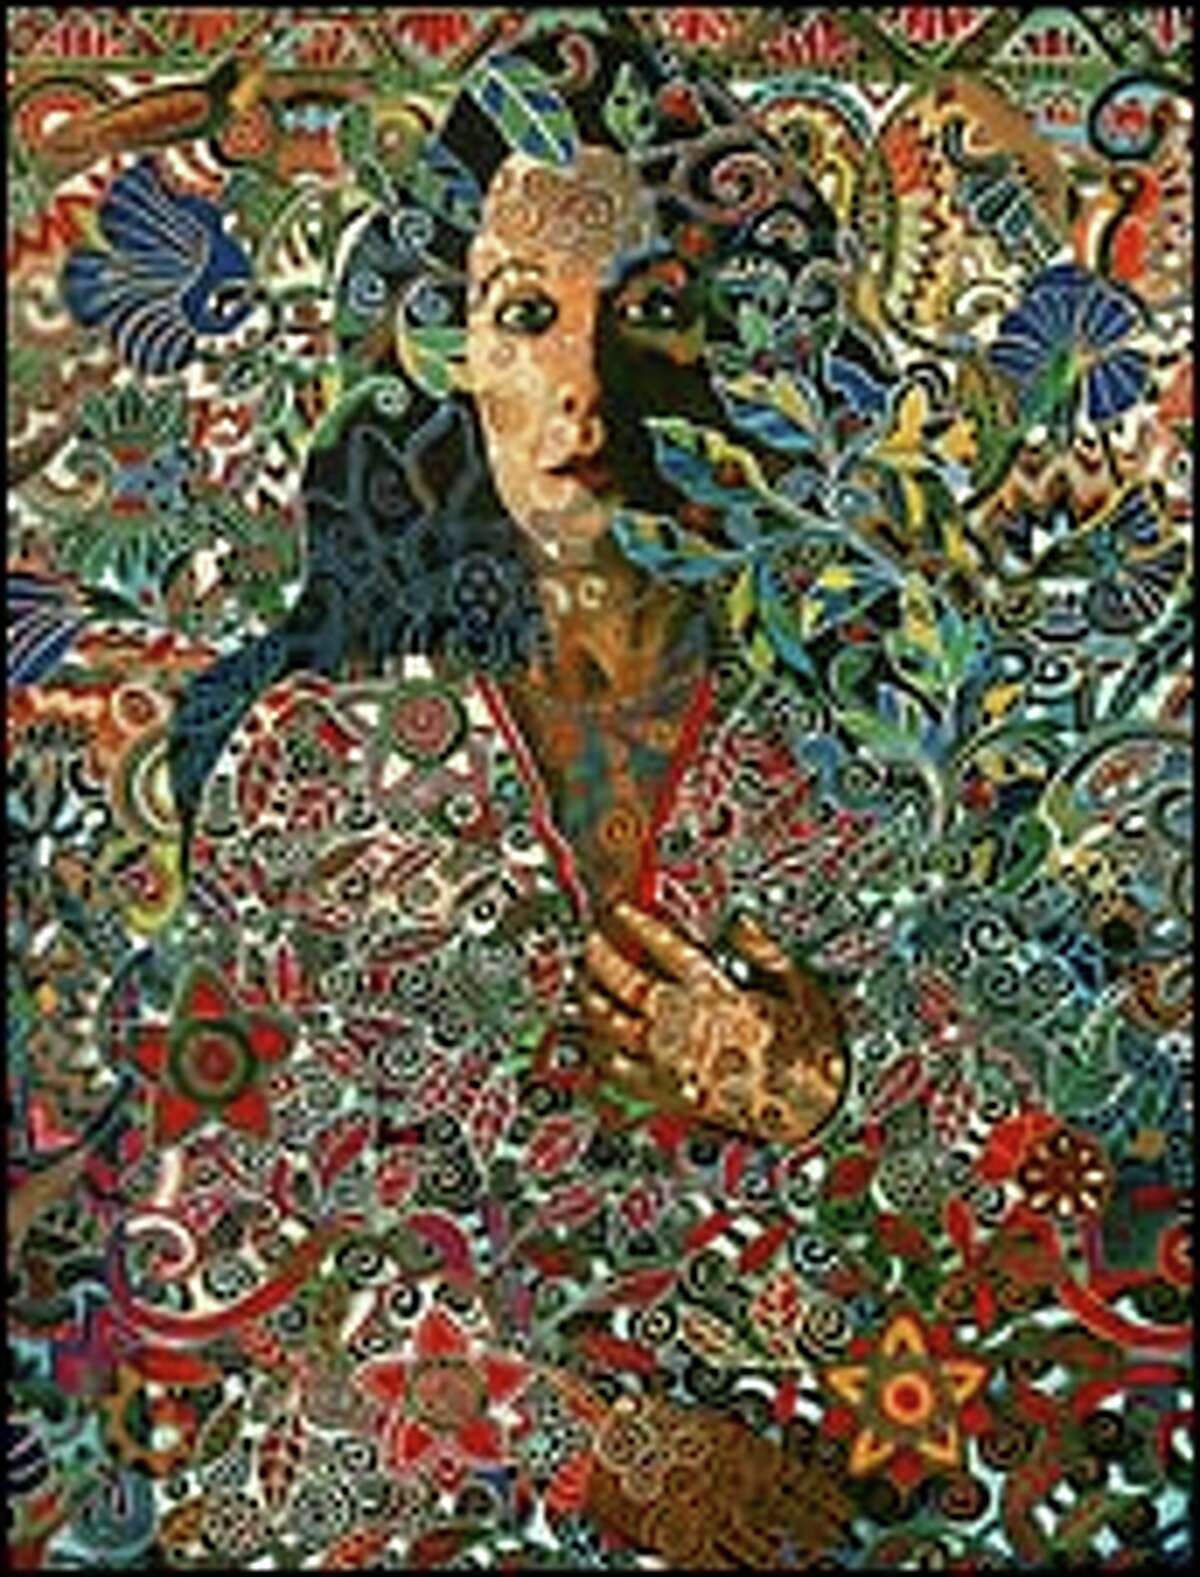 A detail from Arreguin's 1994 work "Nuestra Senora de la Poesia," now in a private collection. The woman in the painting is writer-poet Tess Gallagher.